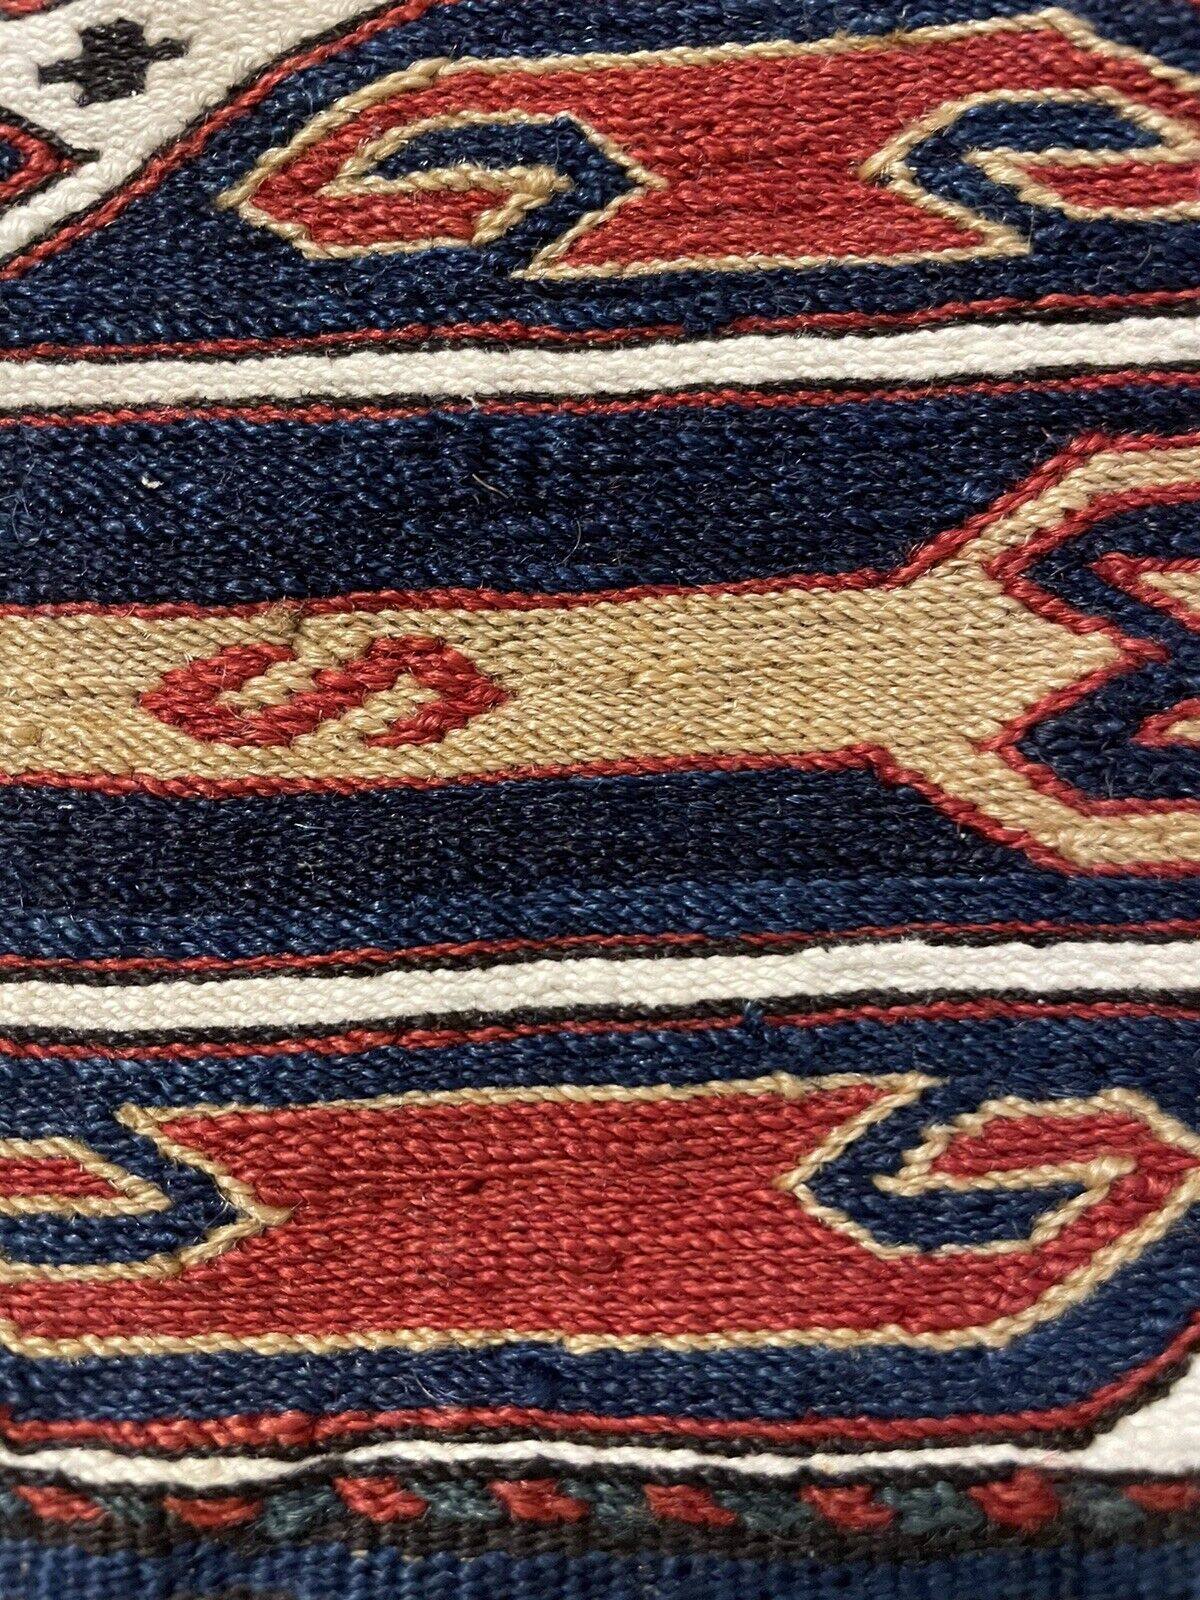 Close-up of character on Handmade Antique Persian Sumak Collectible Kilim - Detailed view showcasing the character and charm of the kilim's design.